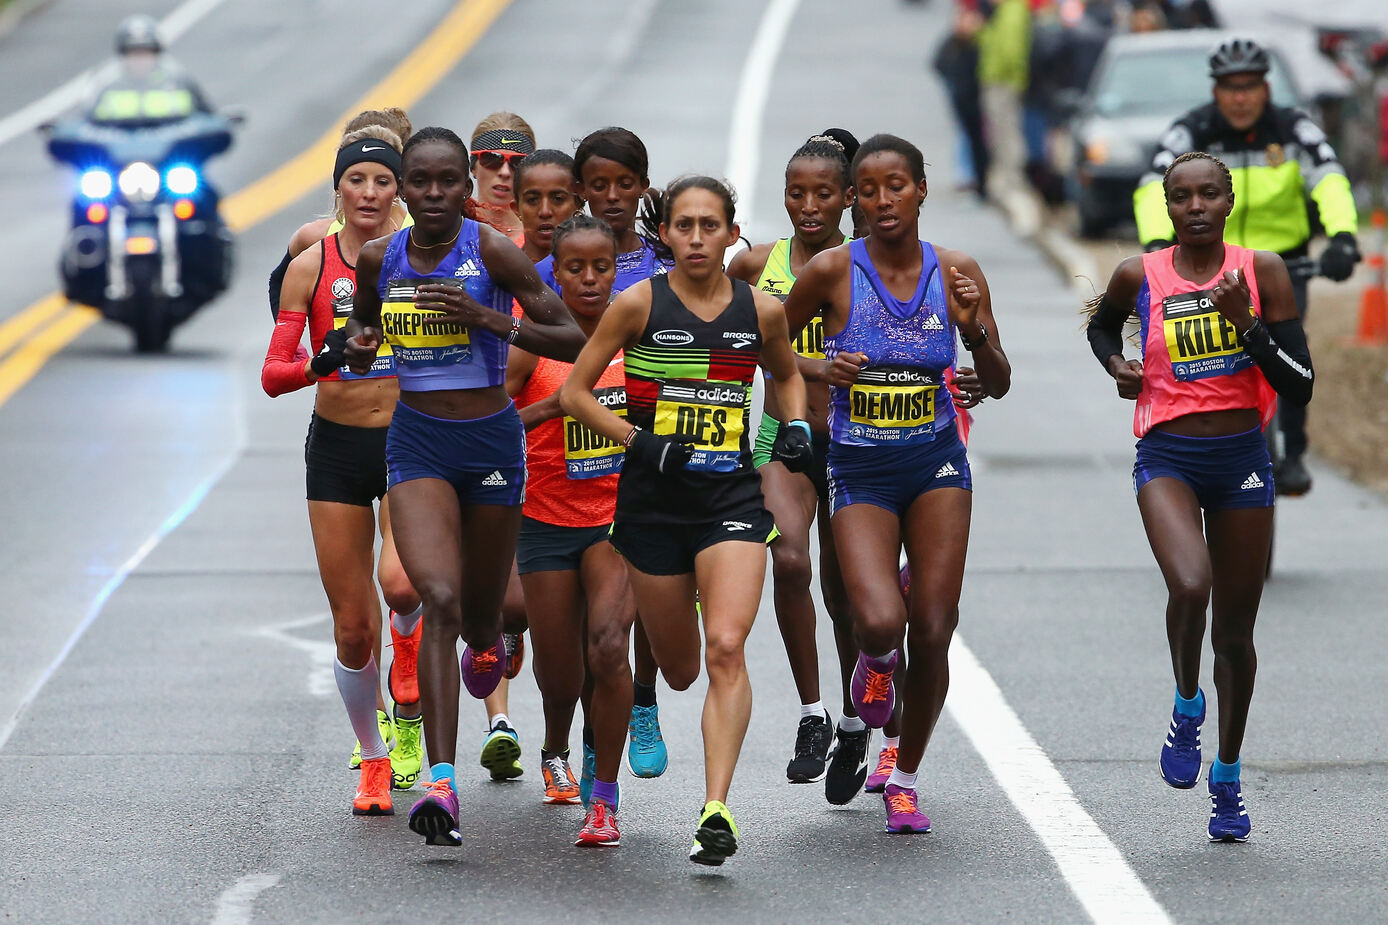 How Much Does It Cost To Run The Boston Marathon